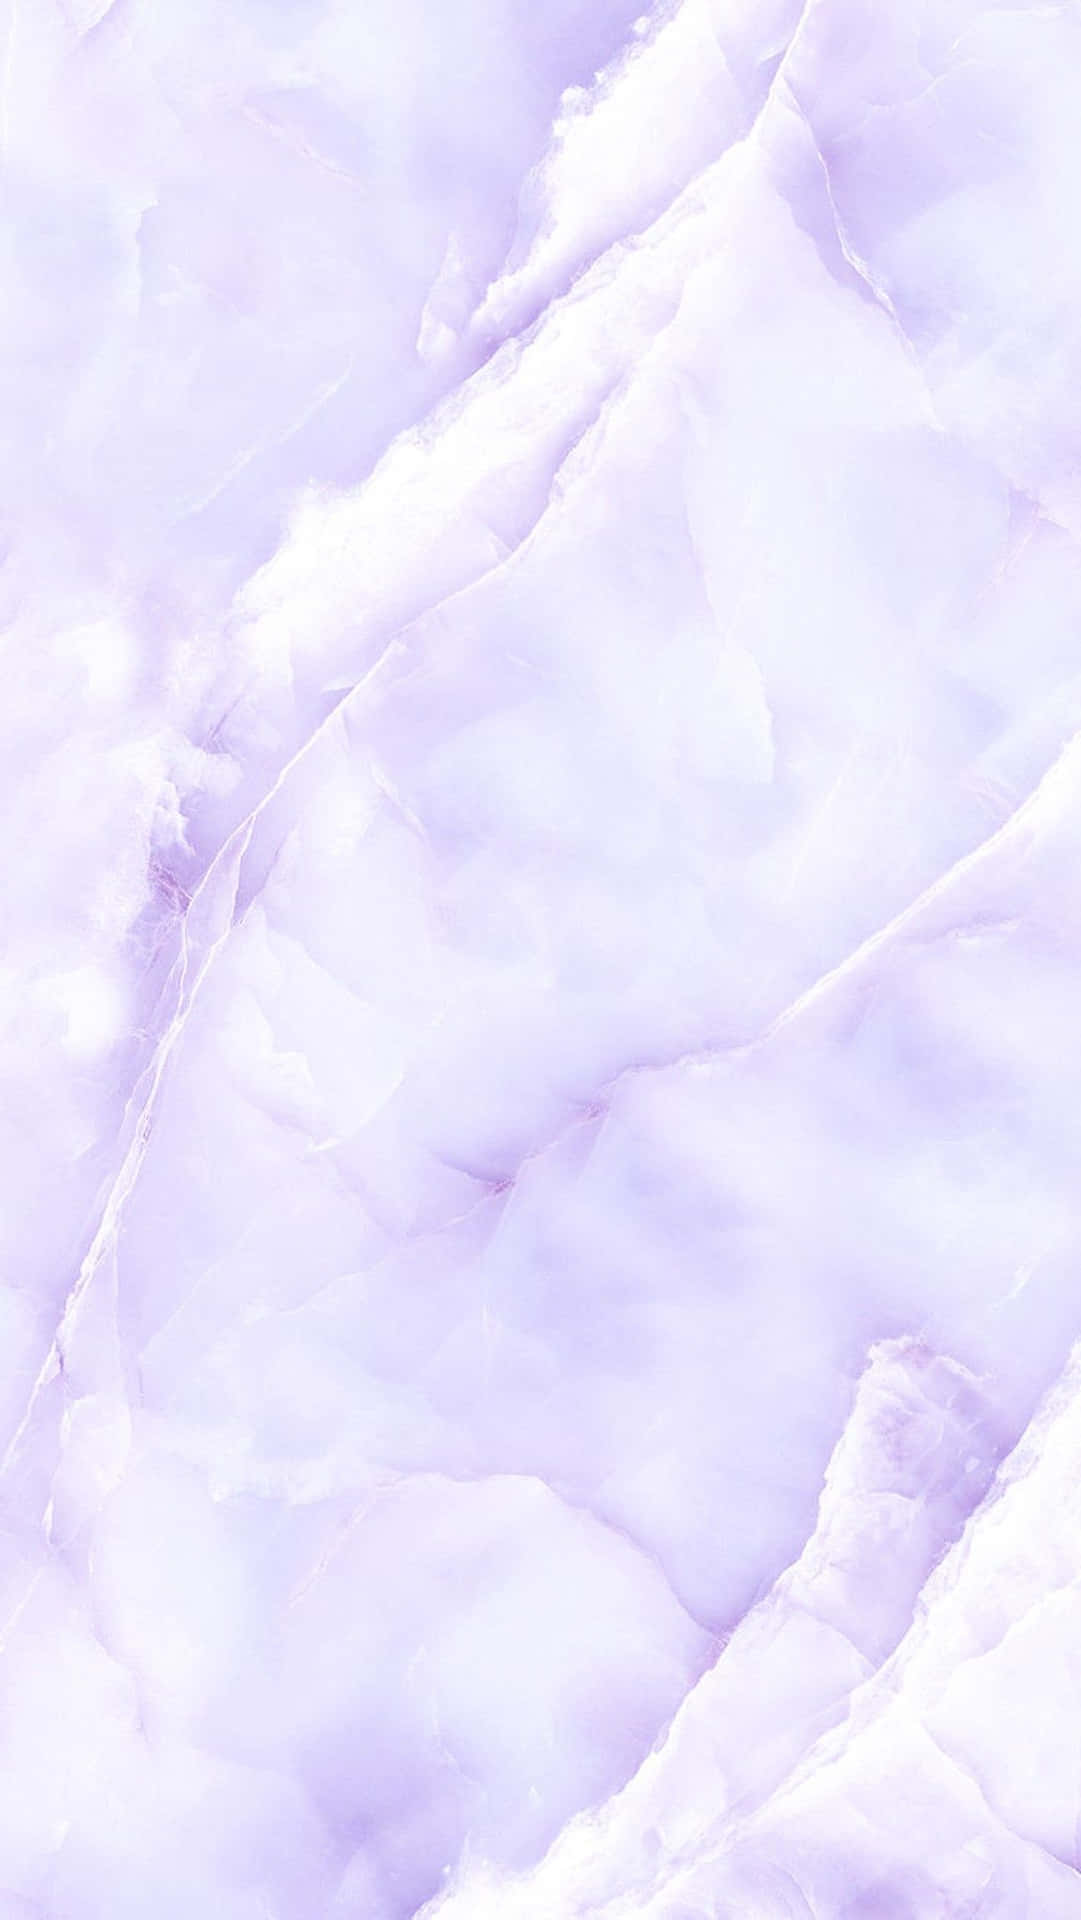 Enjoy the beauty of nature with this surreal lilac background